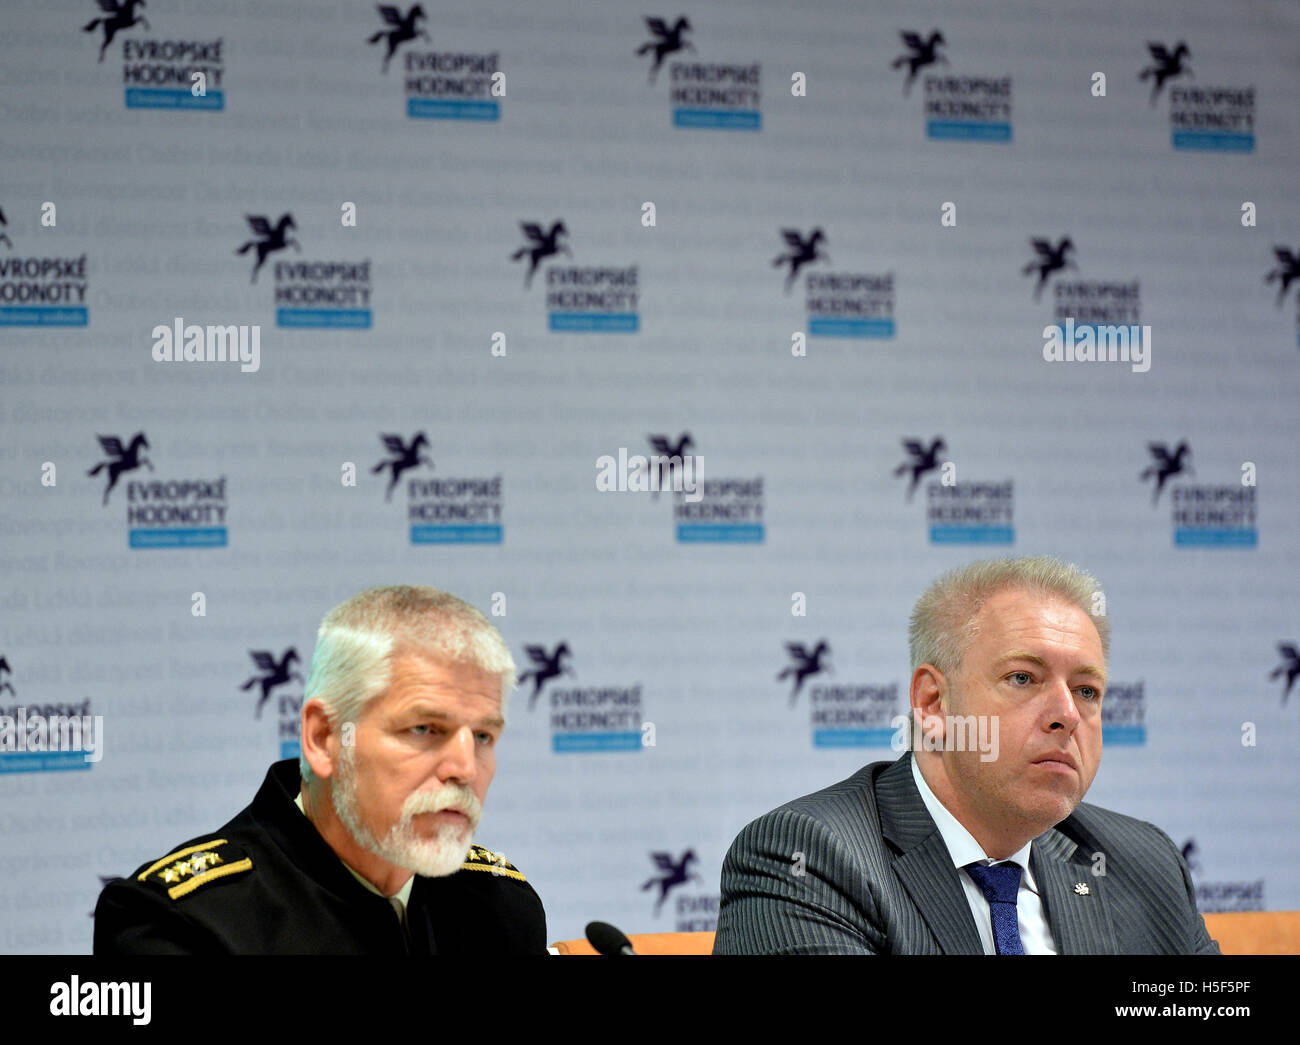 Russia is not considering waging a war with the West, Czech General Petr Pavel, left, Chairman of the NATO Military Committee, told journalists during the Stratcom summit conference devoted to the struggle with disinformation today, on Thursday, October 20, 2016. Russia has at its disposal sophisticated and targeted propaganda against NATO members, Pavel said. It has an analysis of target groups in the individual countries. It knows on whom it can rely and what can be used against whom, Pavel said. Russia is aware of not yet being in the state in which it could be a 'plausible rival' for NATO, Stock Photo